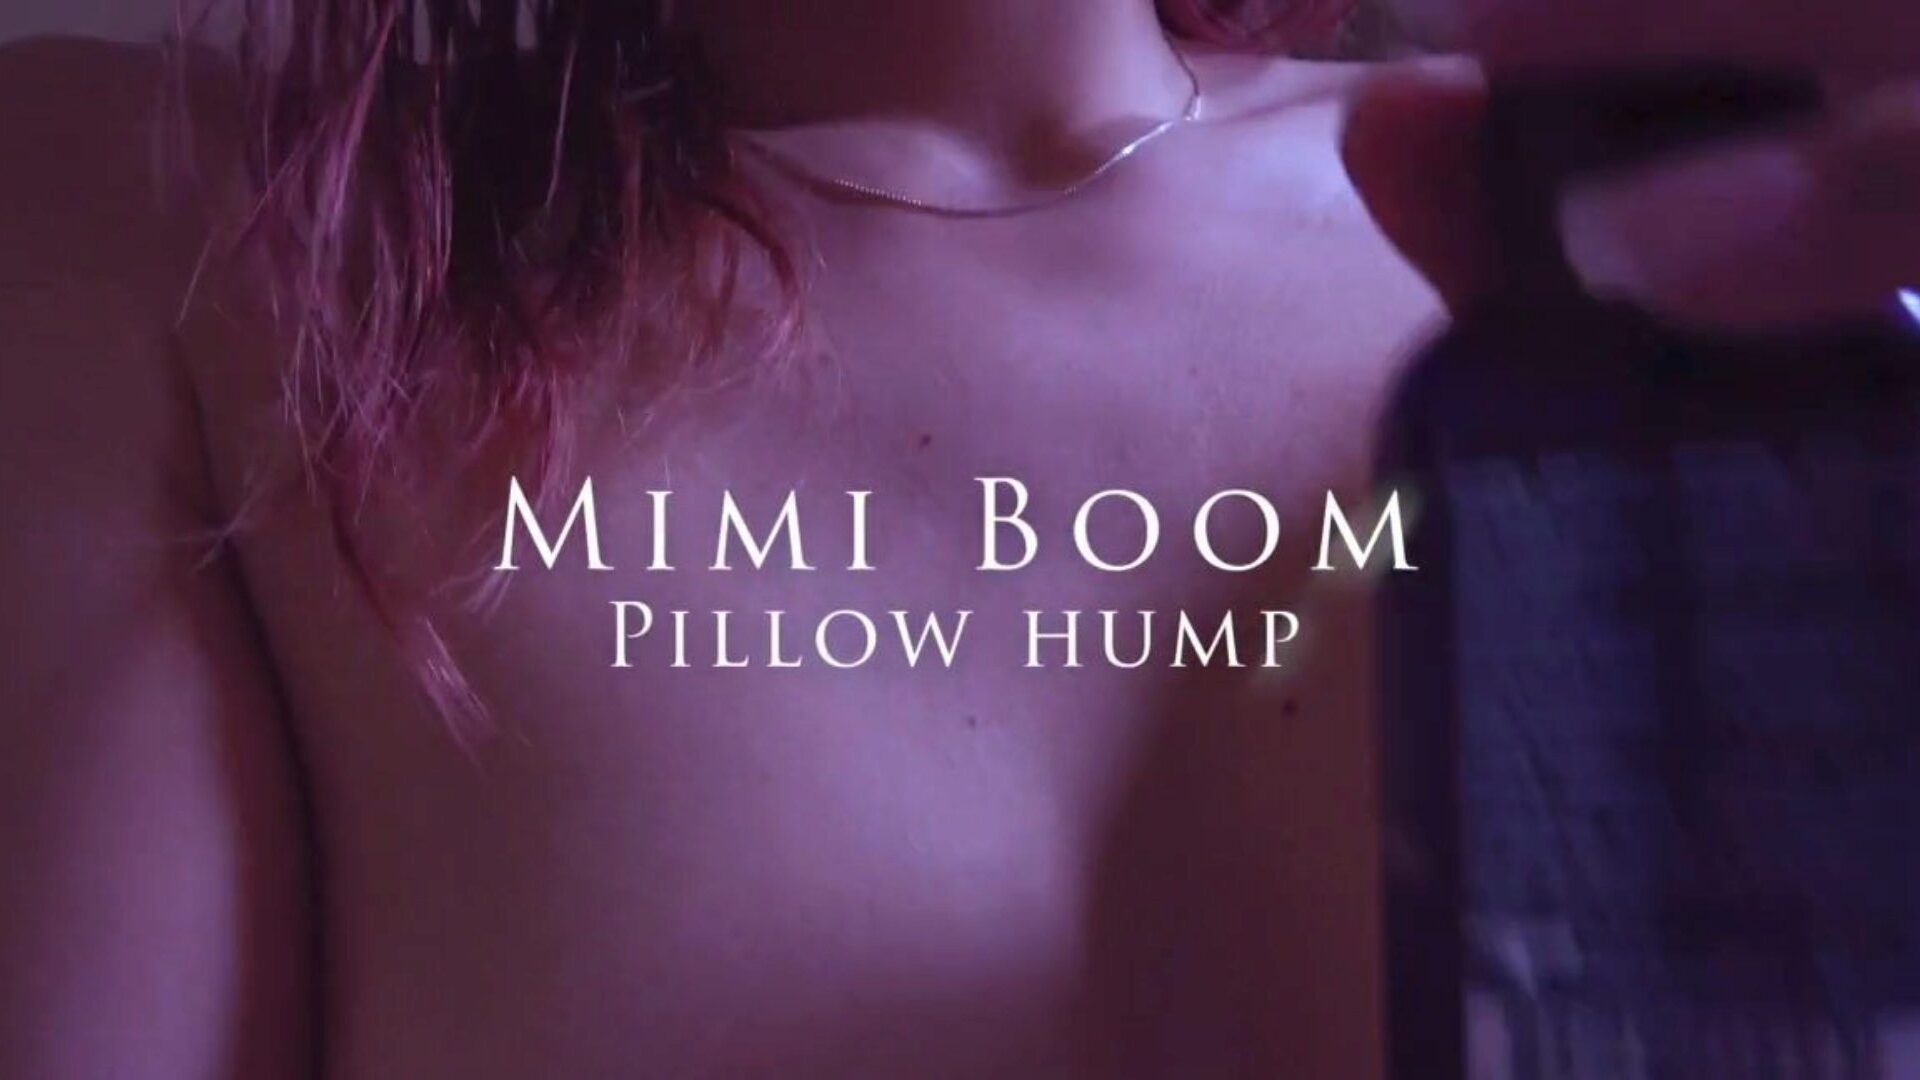 Sometimes I just Love to Hump and Rub my Pillow with my Wet Pussy - Mimi Boom